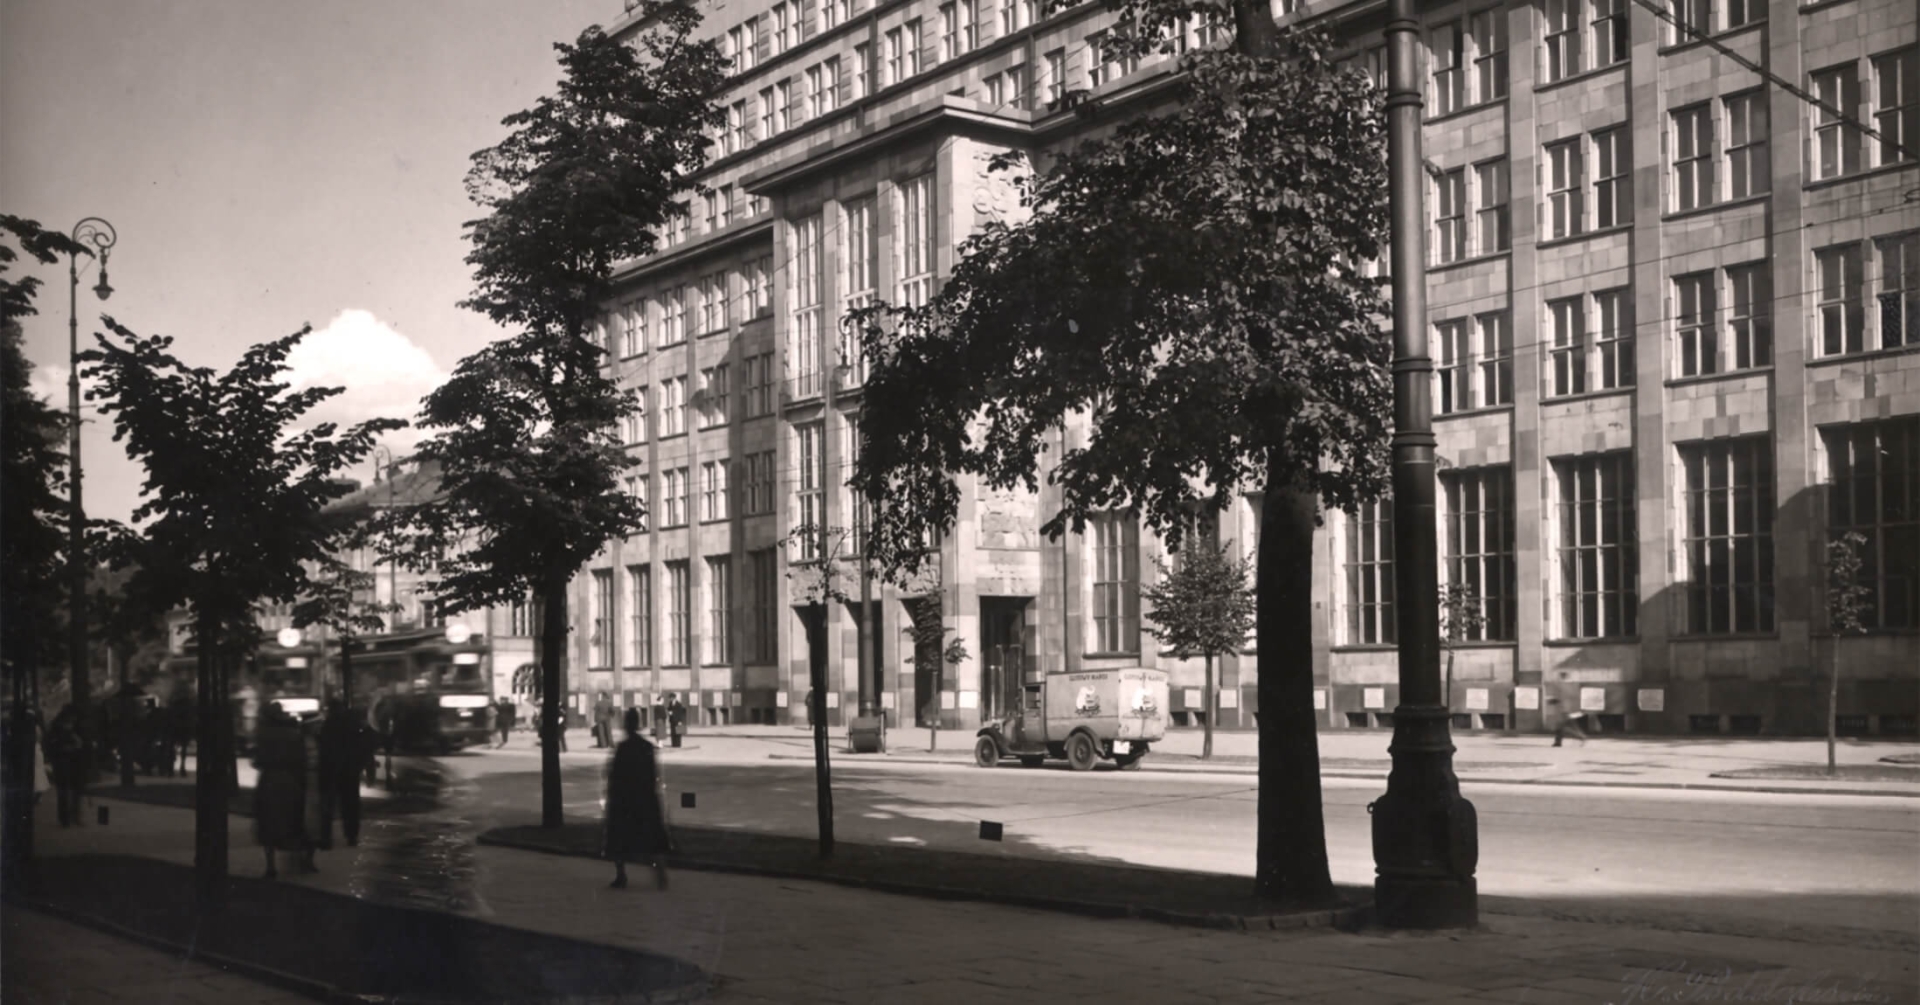 Completed BGK building, 1930s